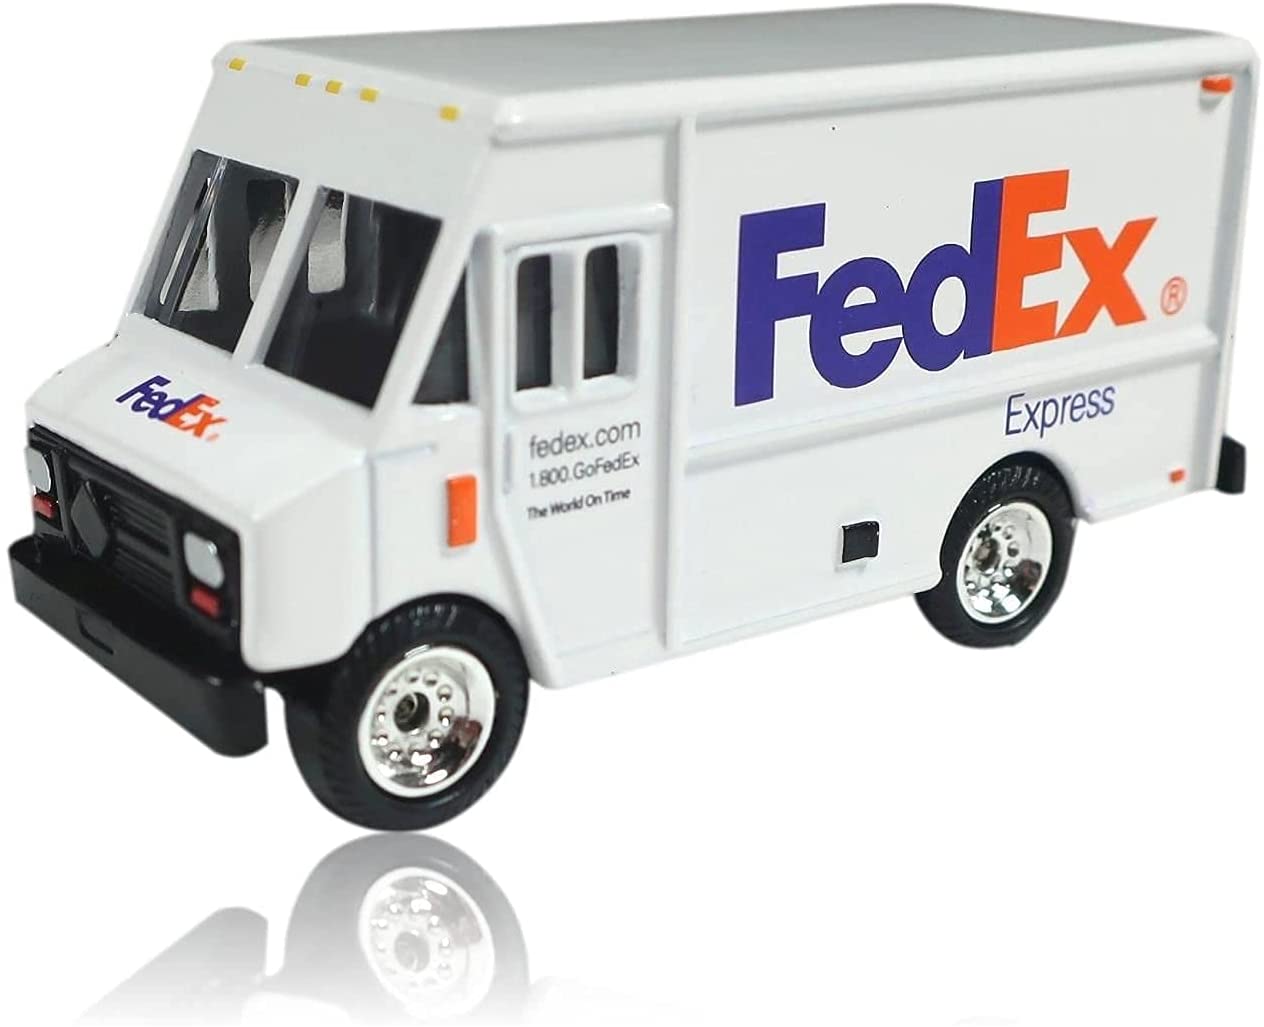 FedEx Express Miniature Delivery Truck Not as a Child's Toy